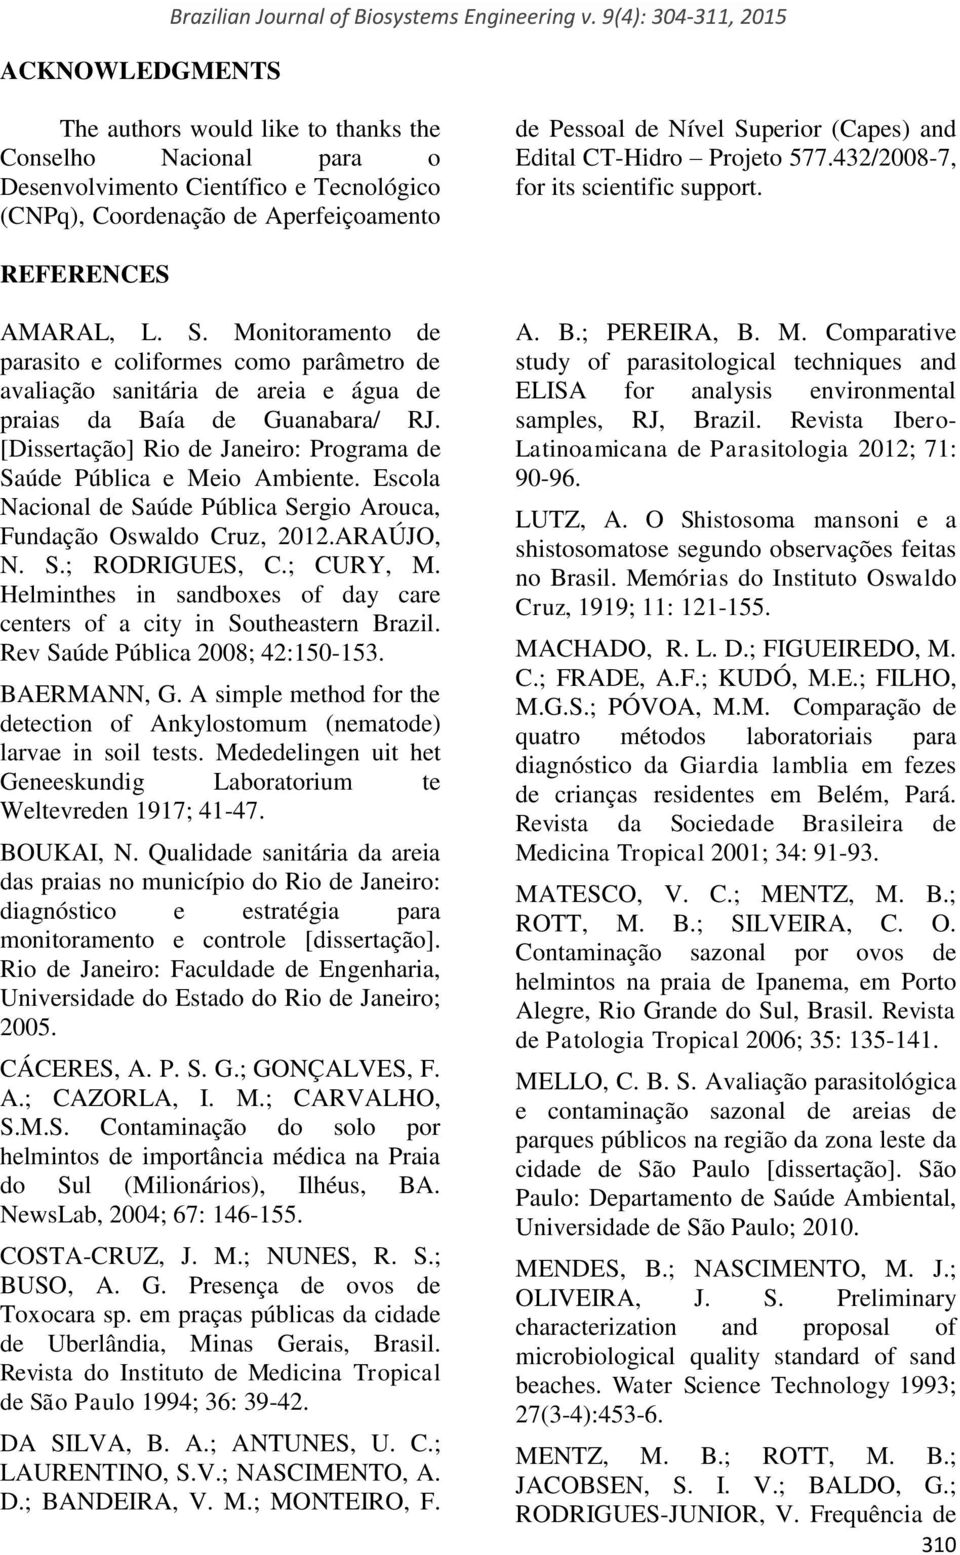 and Edital CT-Hidro Projeto 577.432/2008-7, for its scientific support. REFERENCES AMARAL, L. S.